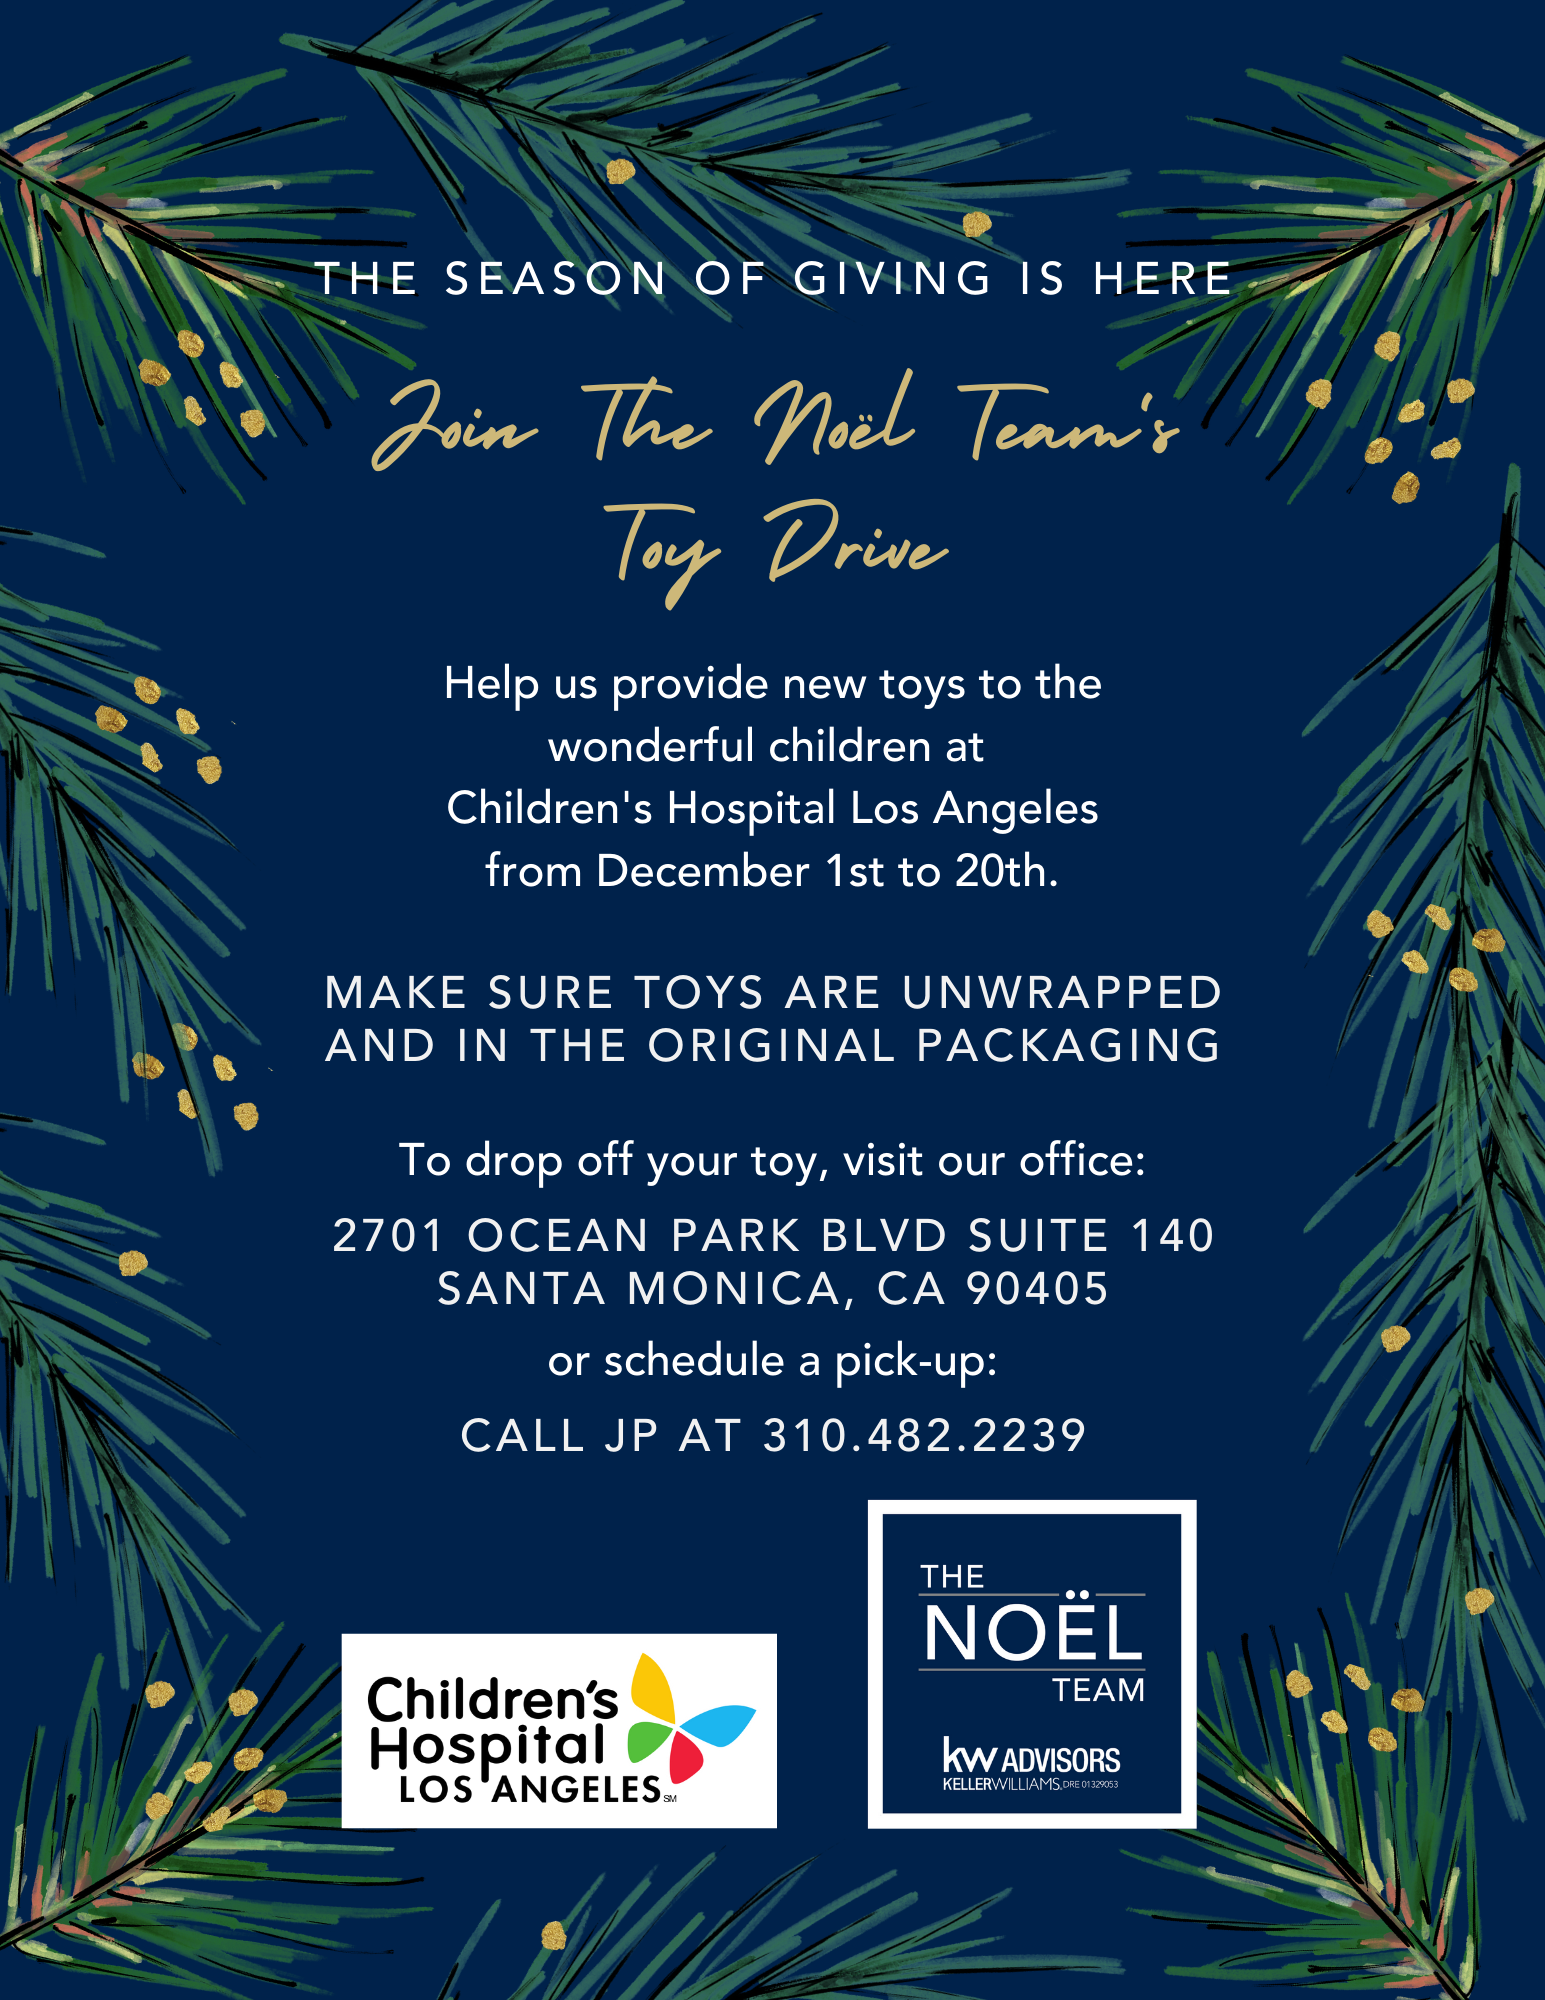 The Season of Giving Is Here. Join The Noel Team's Toy Drive Toy Drive Benefiting Children's Hospital Los Angeles